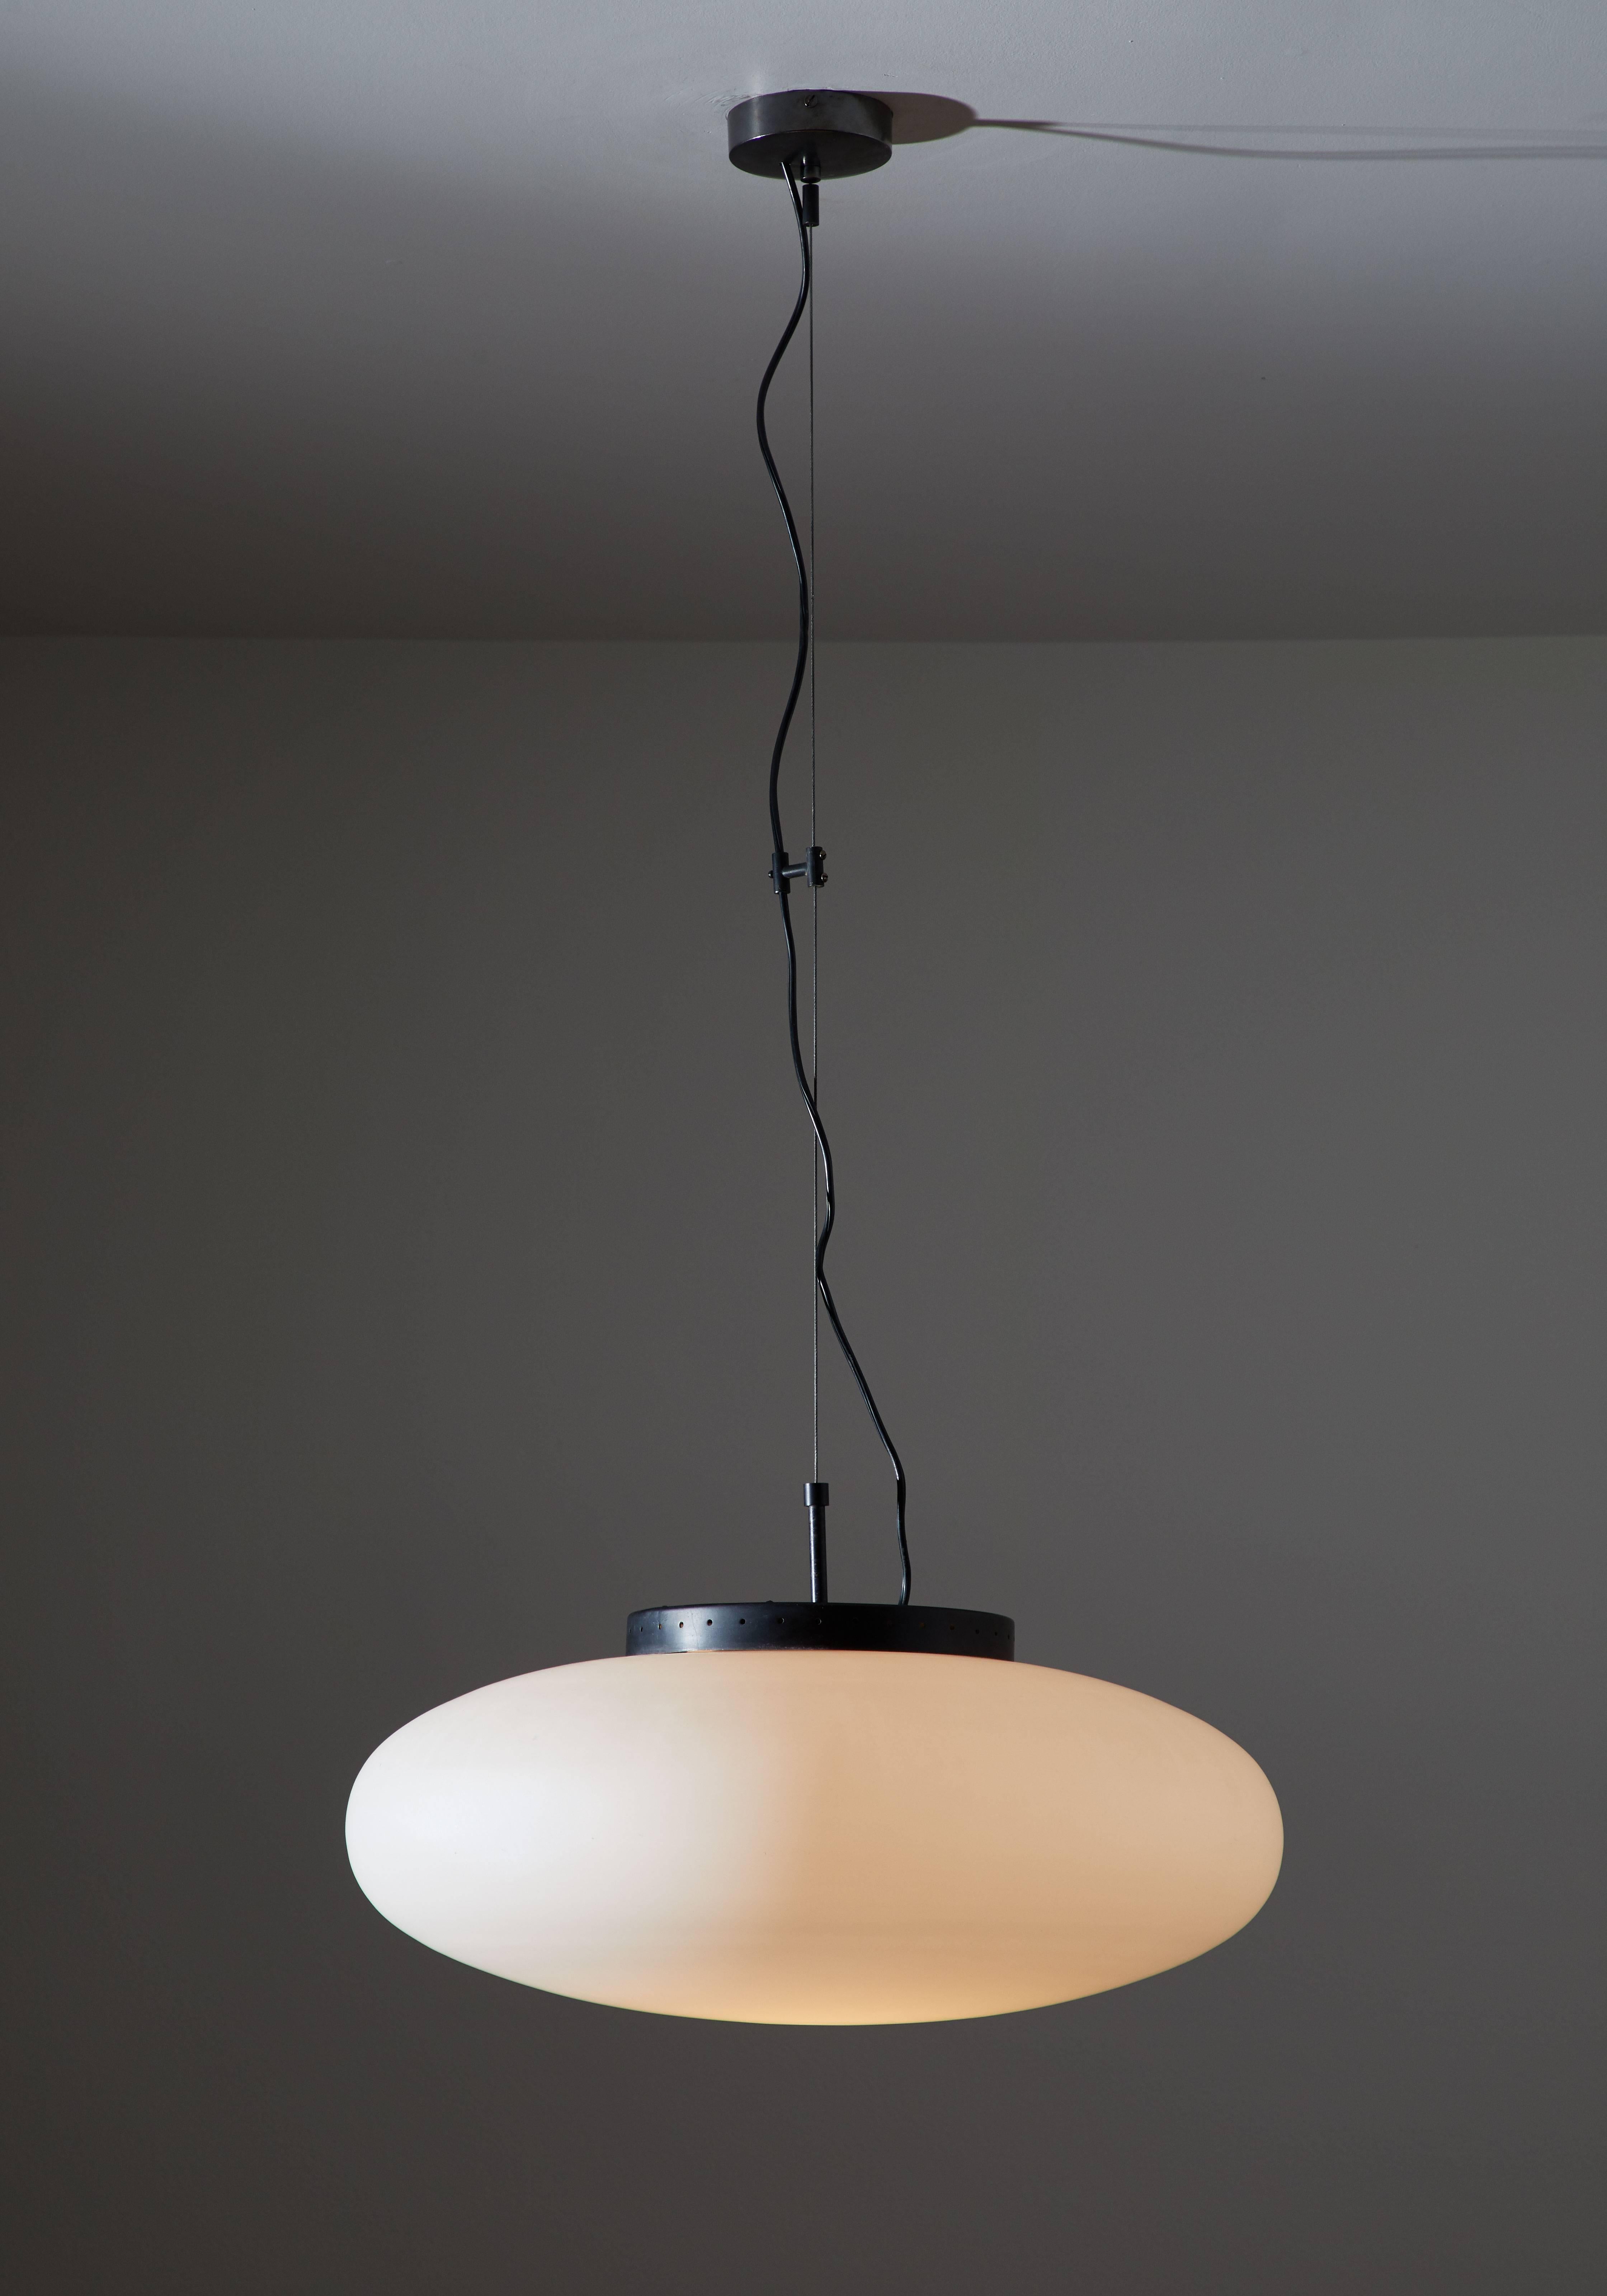 Suspension pendant manufactured in Italy, circa 1950s. Brushed satin glass, enameled metal and brass. Original canopy. Rewired for US junction boxes. Takes one e27 100w maximum bulb. Overall drop can be adjusted.